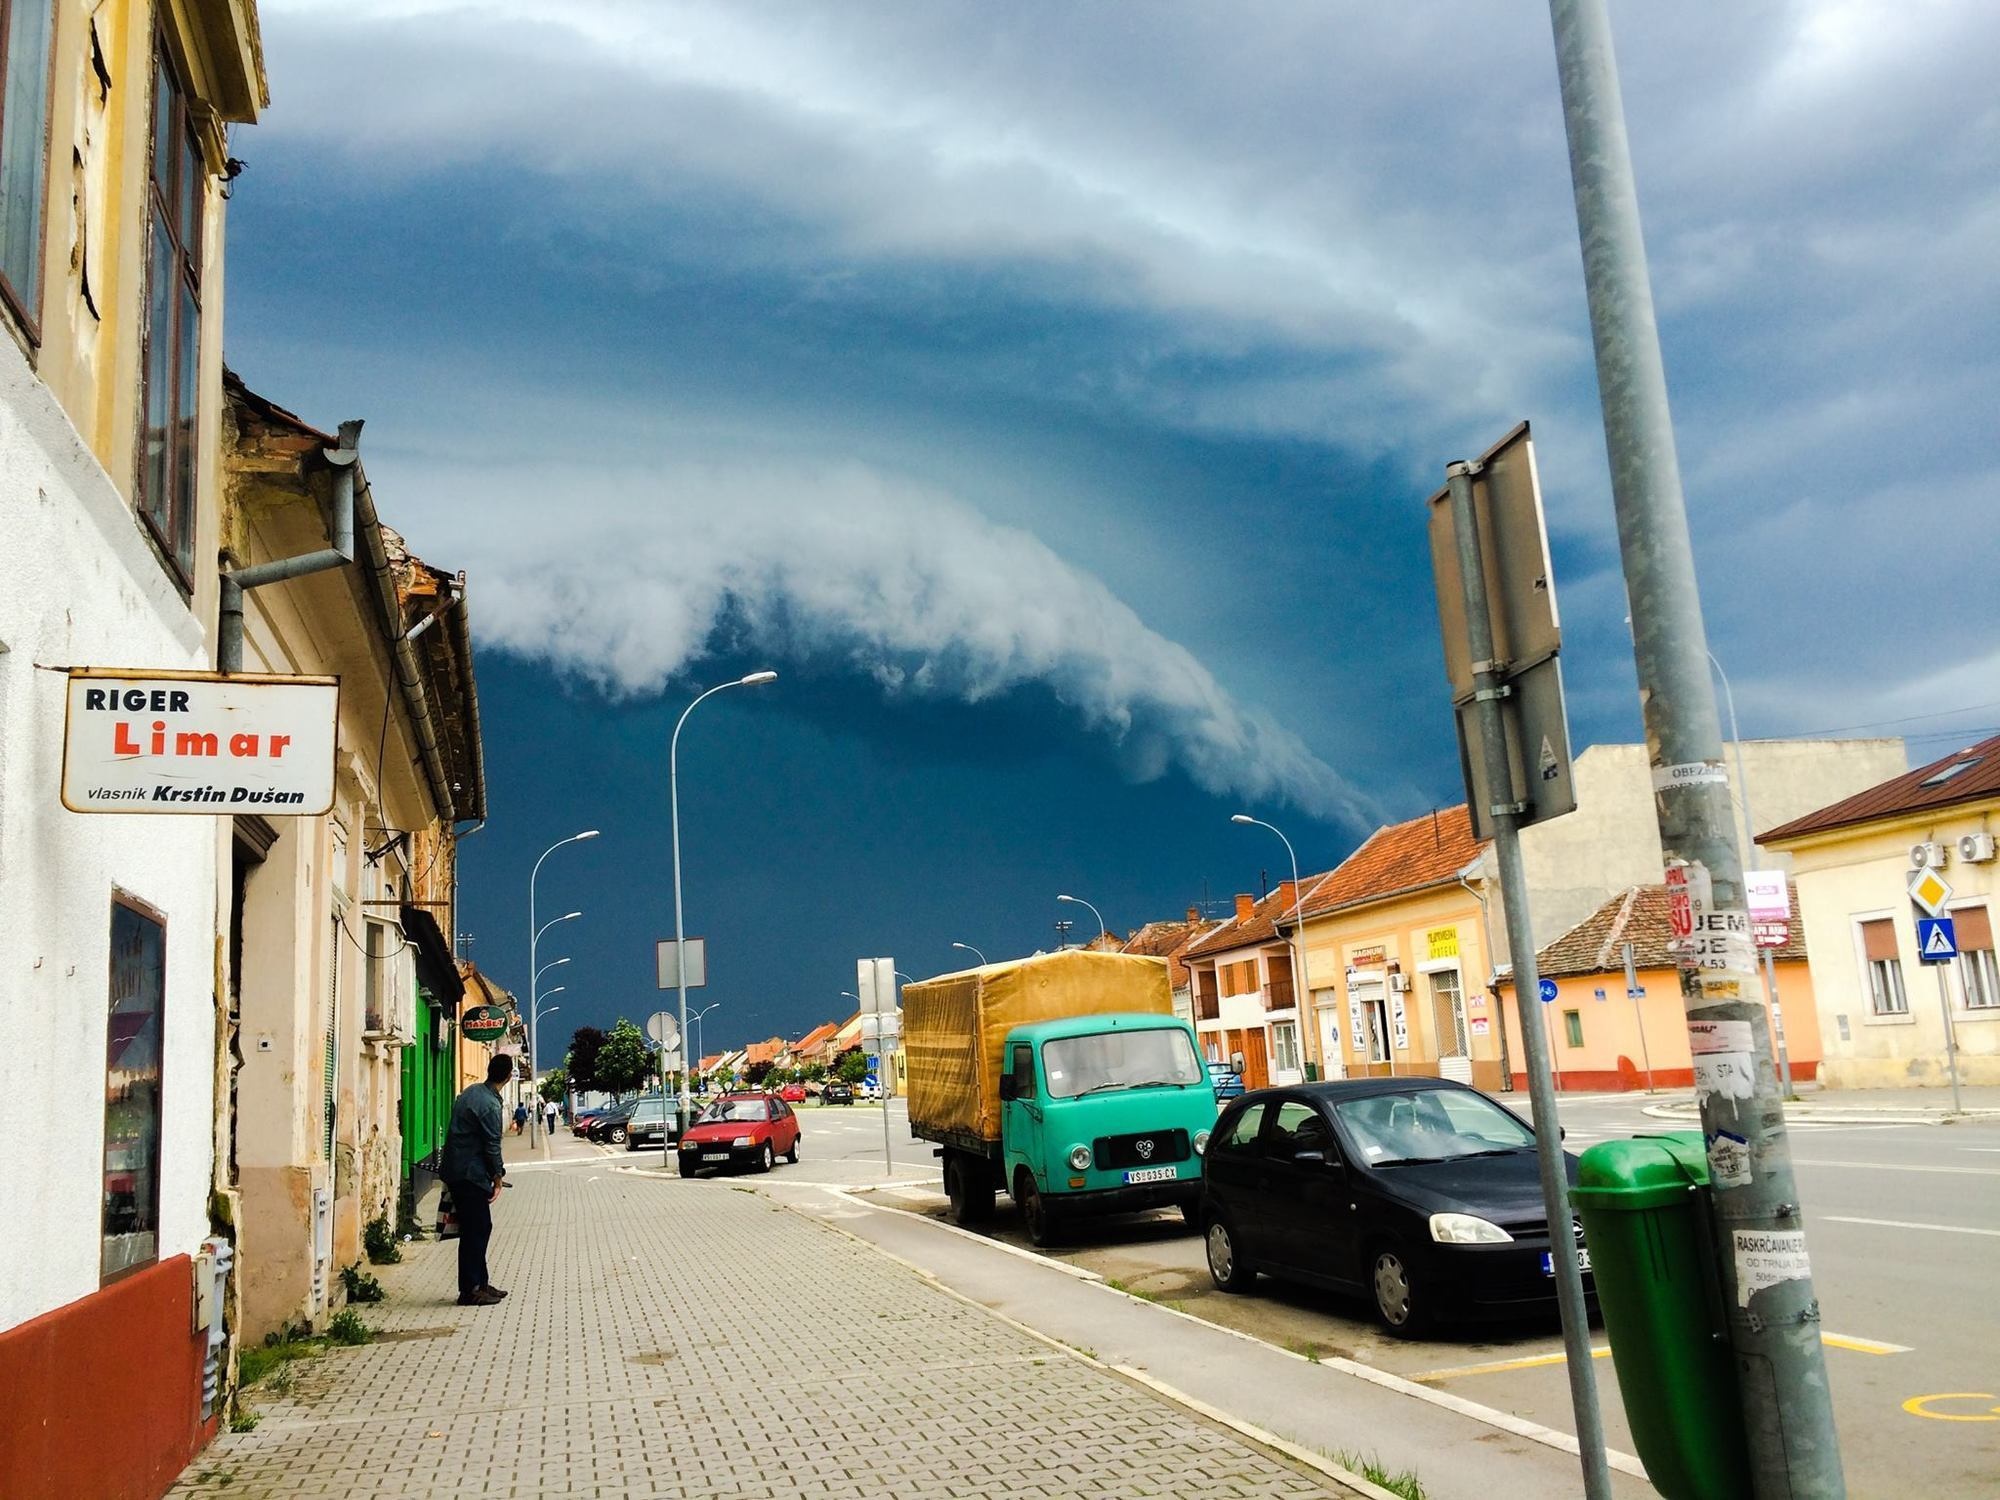 Cloud formation at the outskirts a city looks like a terrifying wave.